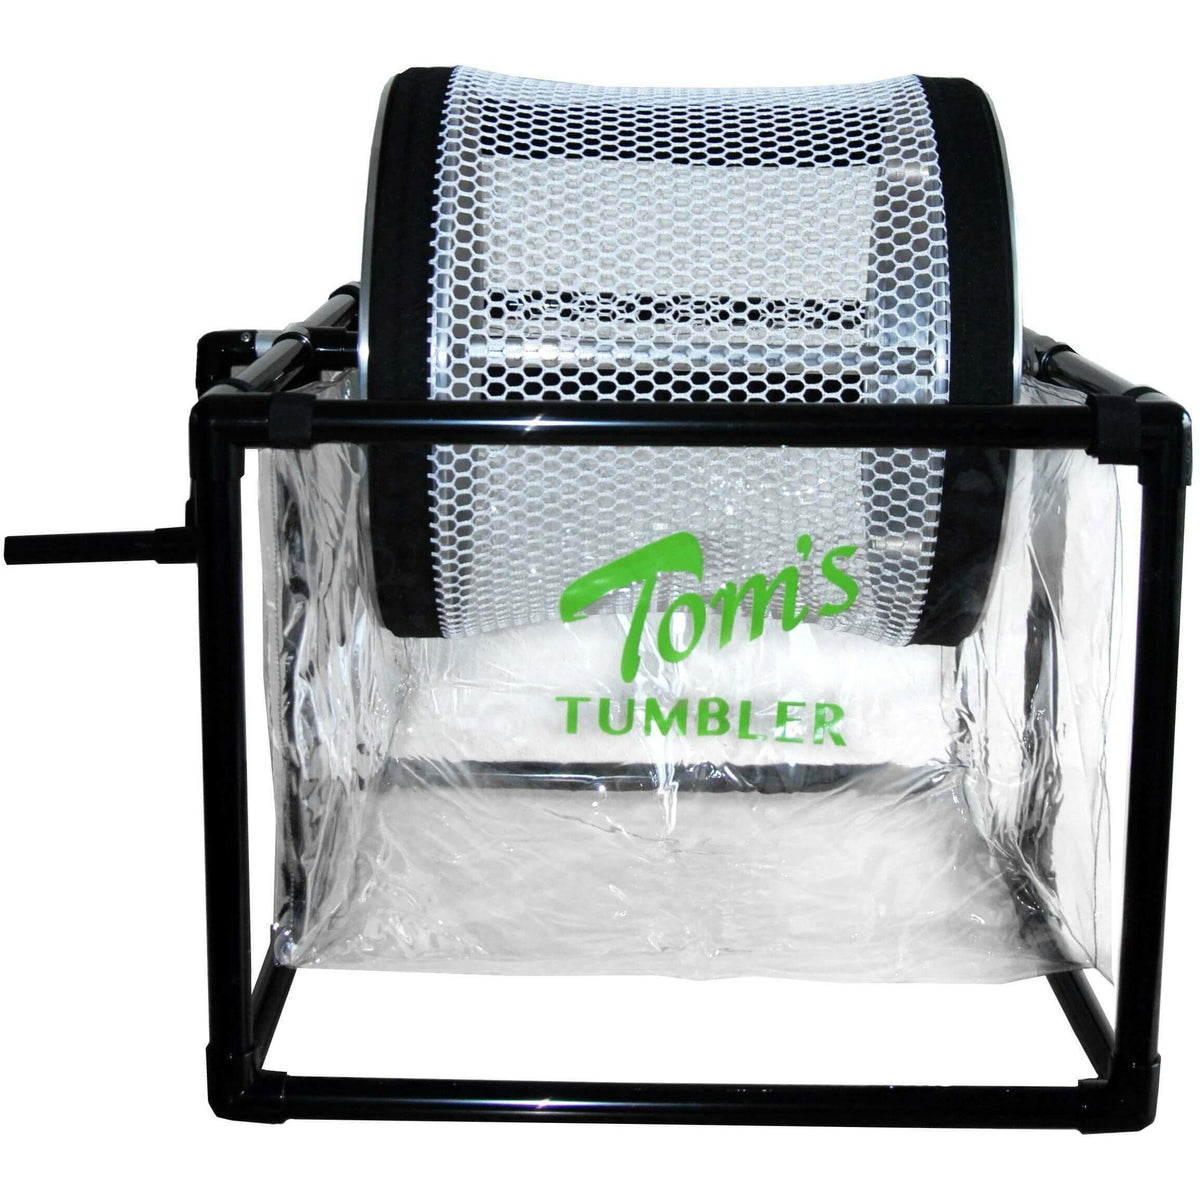 Tom&#39;s Tumble Trimmer Toms Tumble Trimmer 1600 Hand Crank Dry Bud Trimming Machine Main